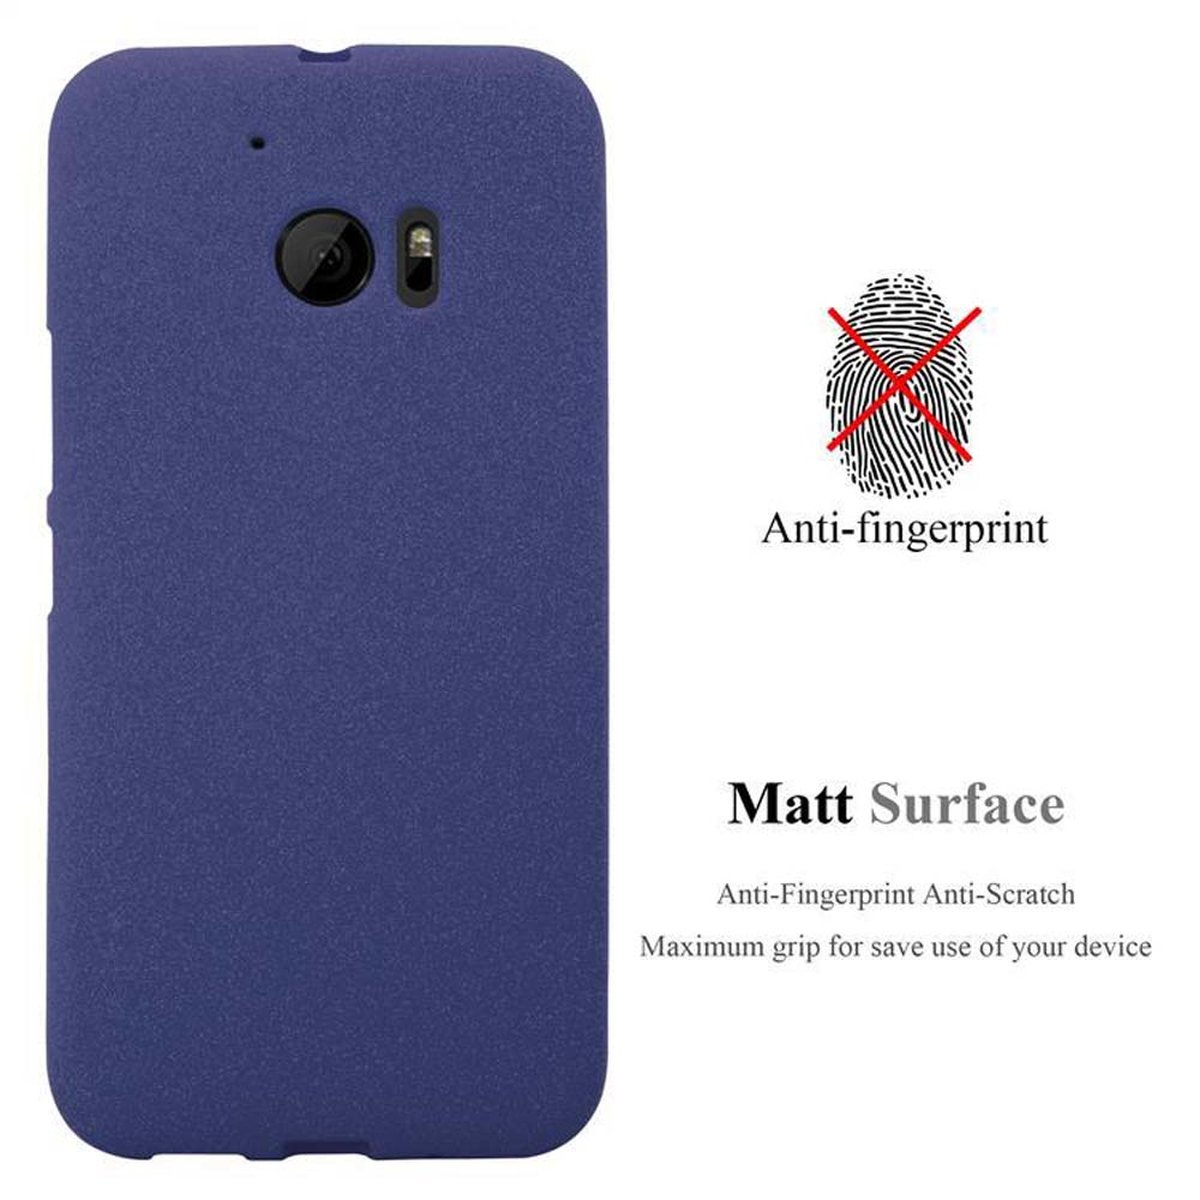 ONE Backcover, BLAU Frosted M10, CADORABO TPU HTC, DUNKEL FROST Schutzhülle,